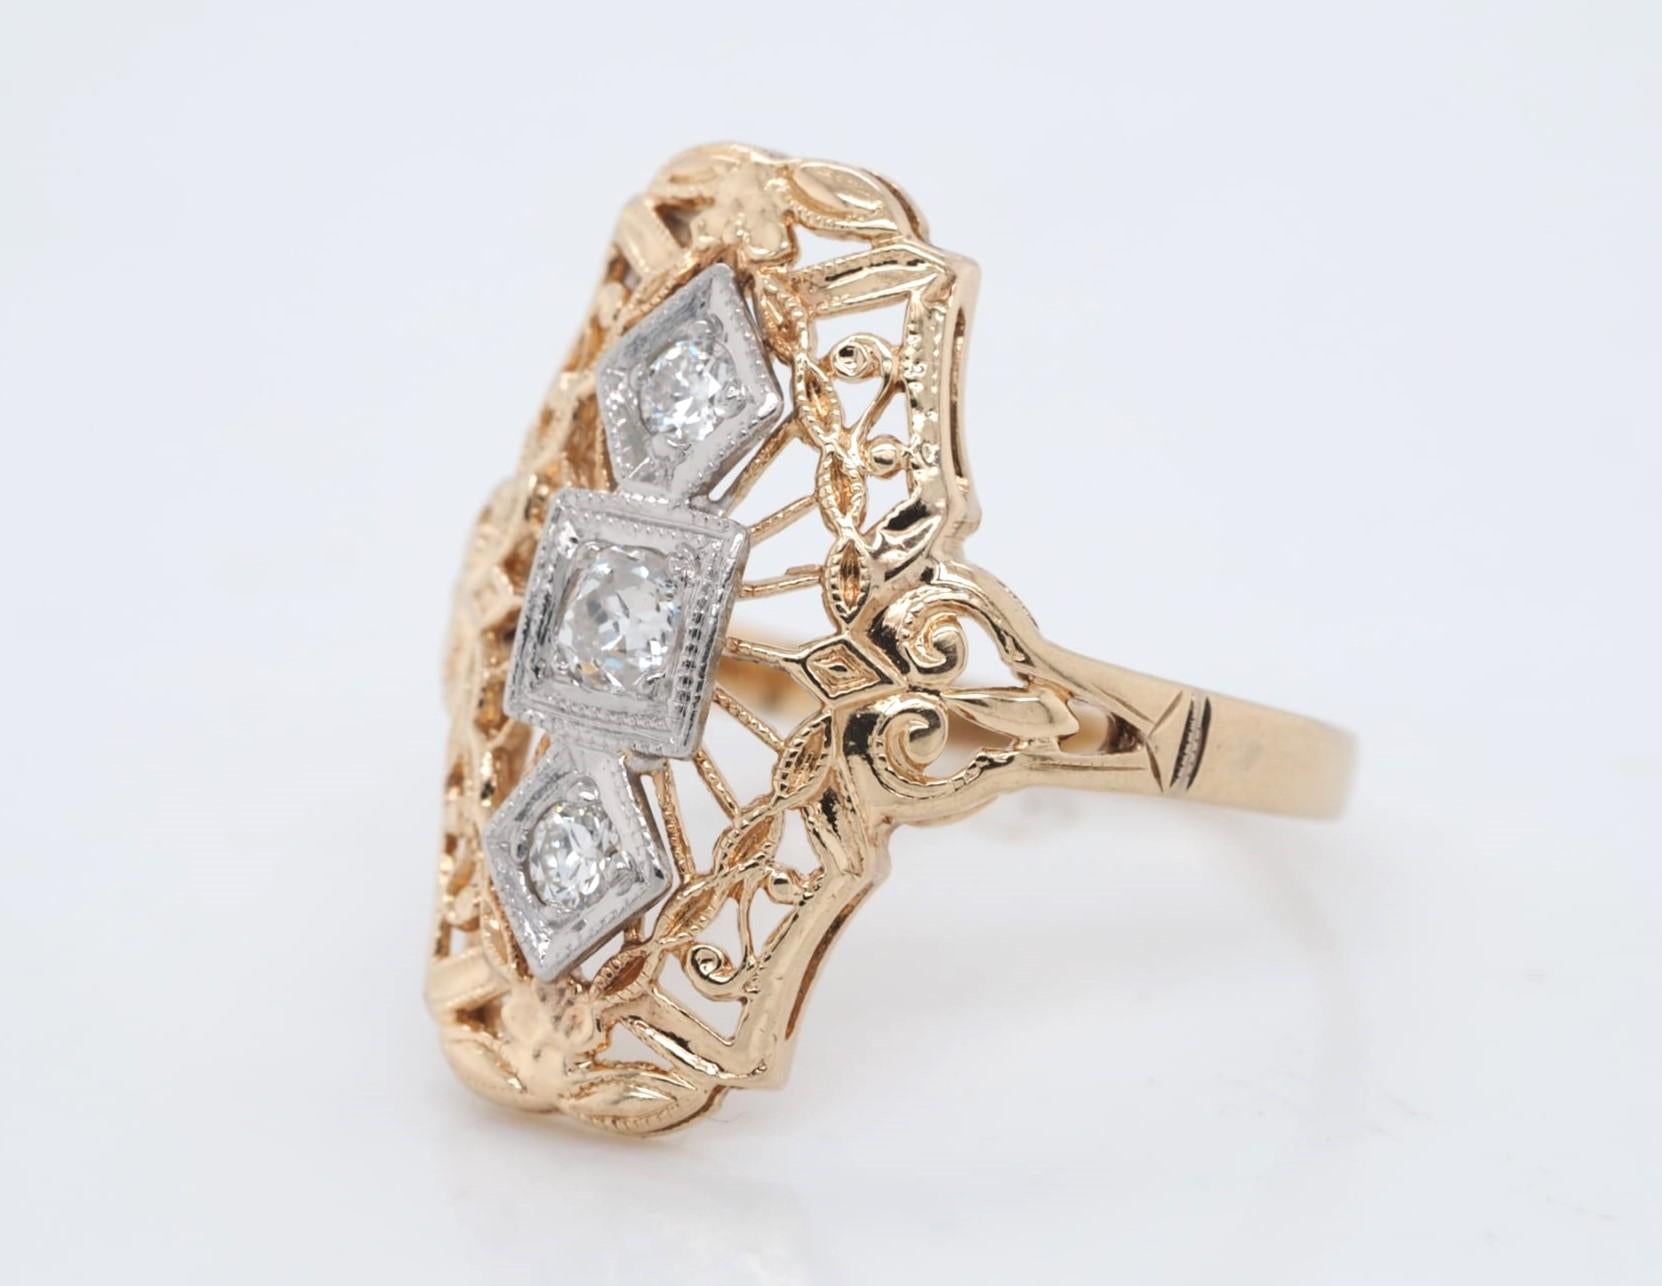 This stunning antique ring is crafted from 14k yellow gold and palladium, featuring a natural round Old European cut diamond with a total carat weight of 0.23. The diamond has a clarity grade of SI1-SI2 and a color grade of H, and is set in a prong